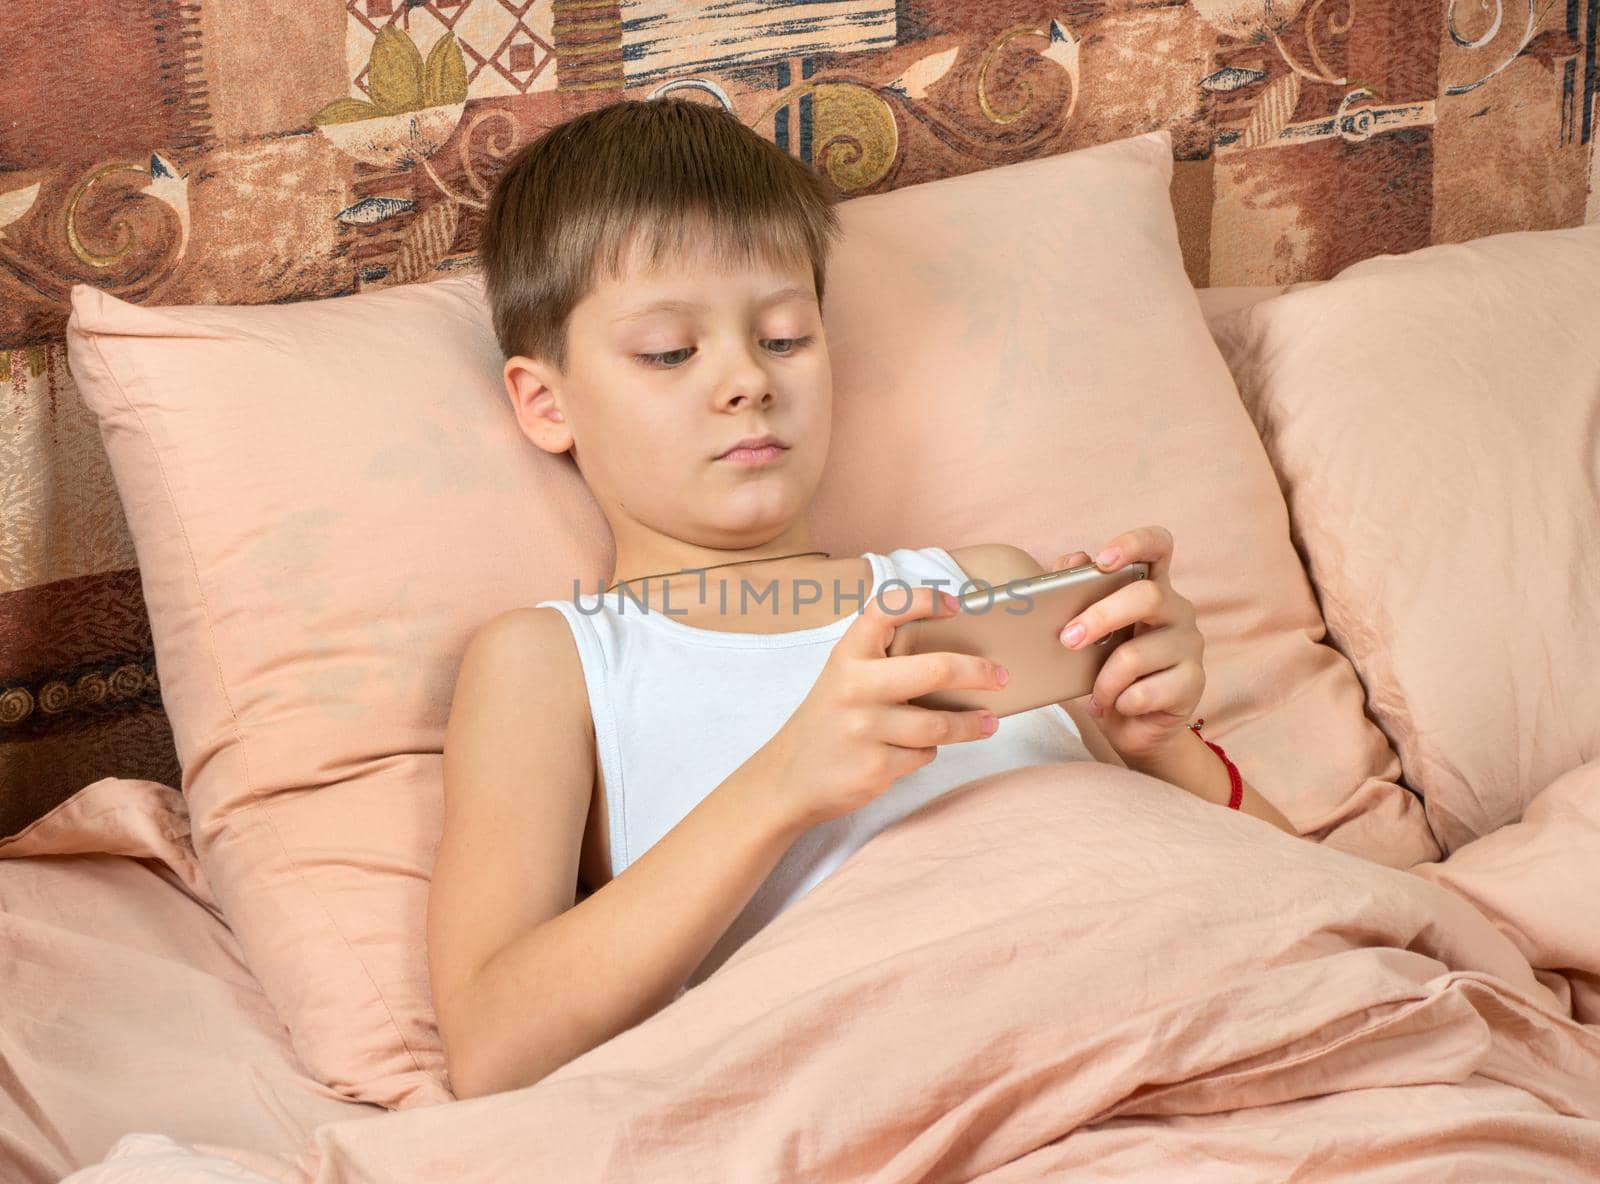 Young boy plays games on phone in bed